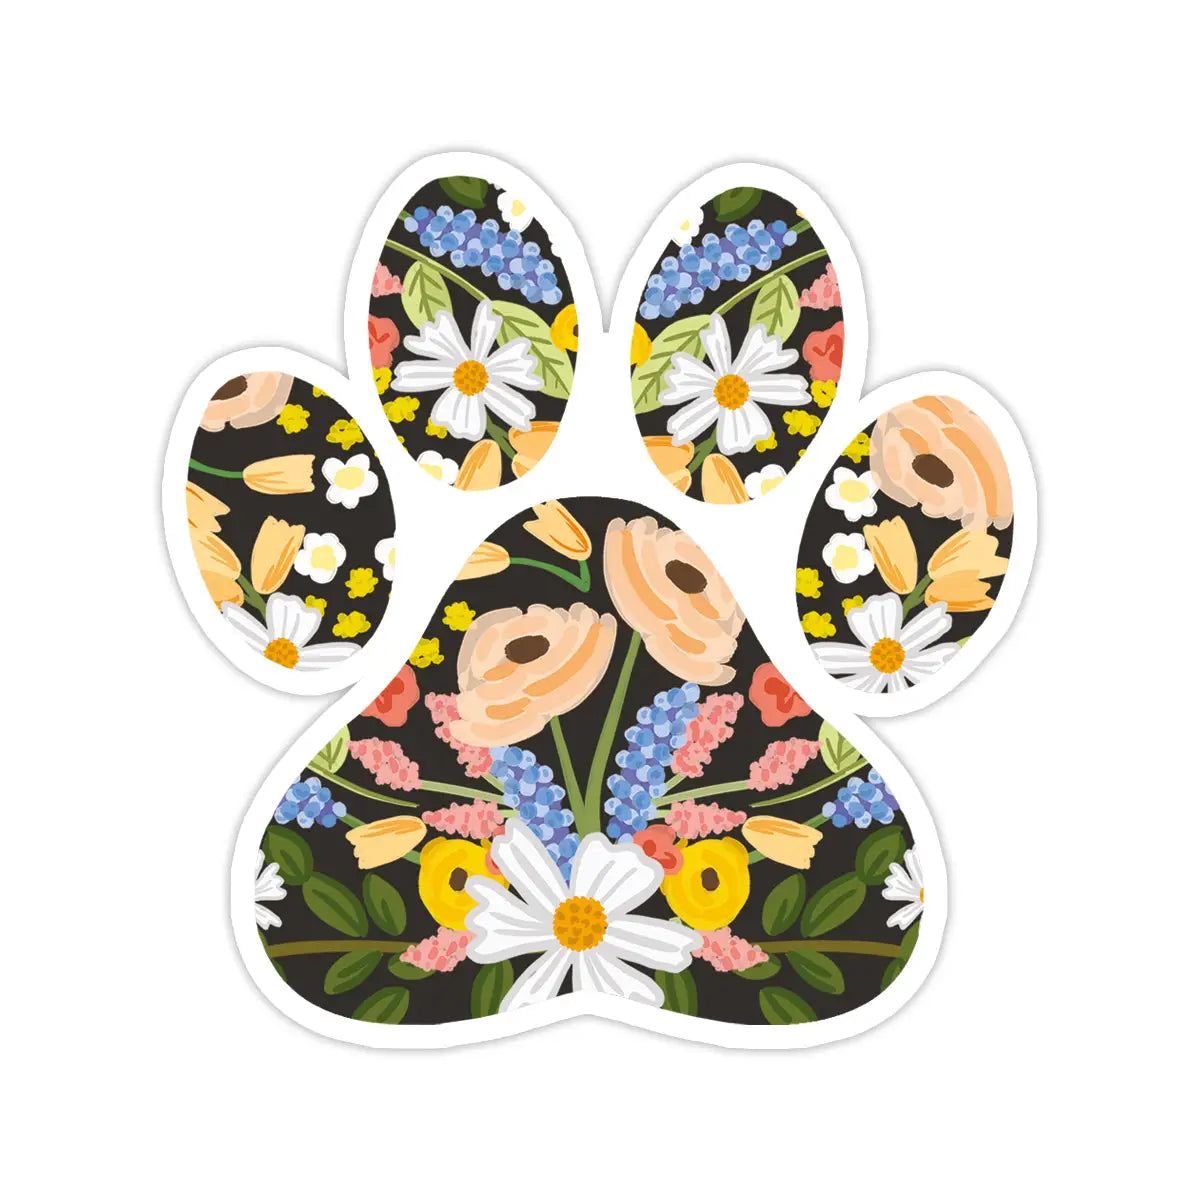 Paw shaped sticker with orange, white, and green floral illustrations